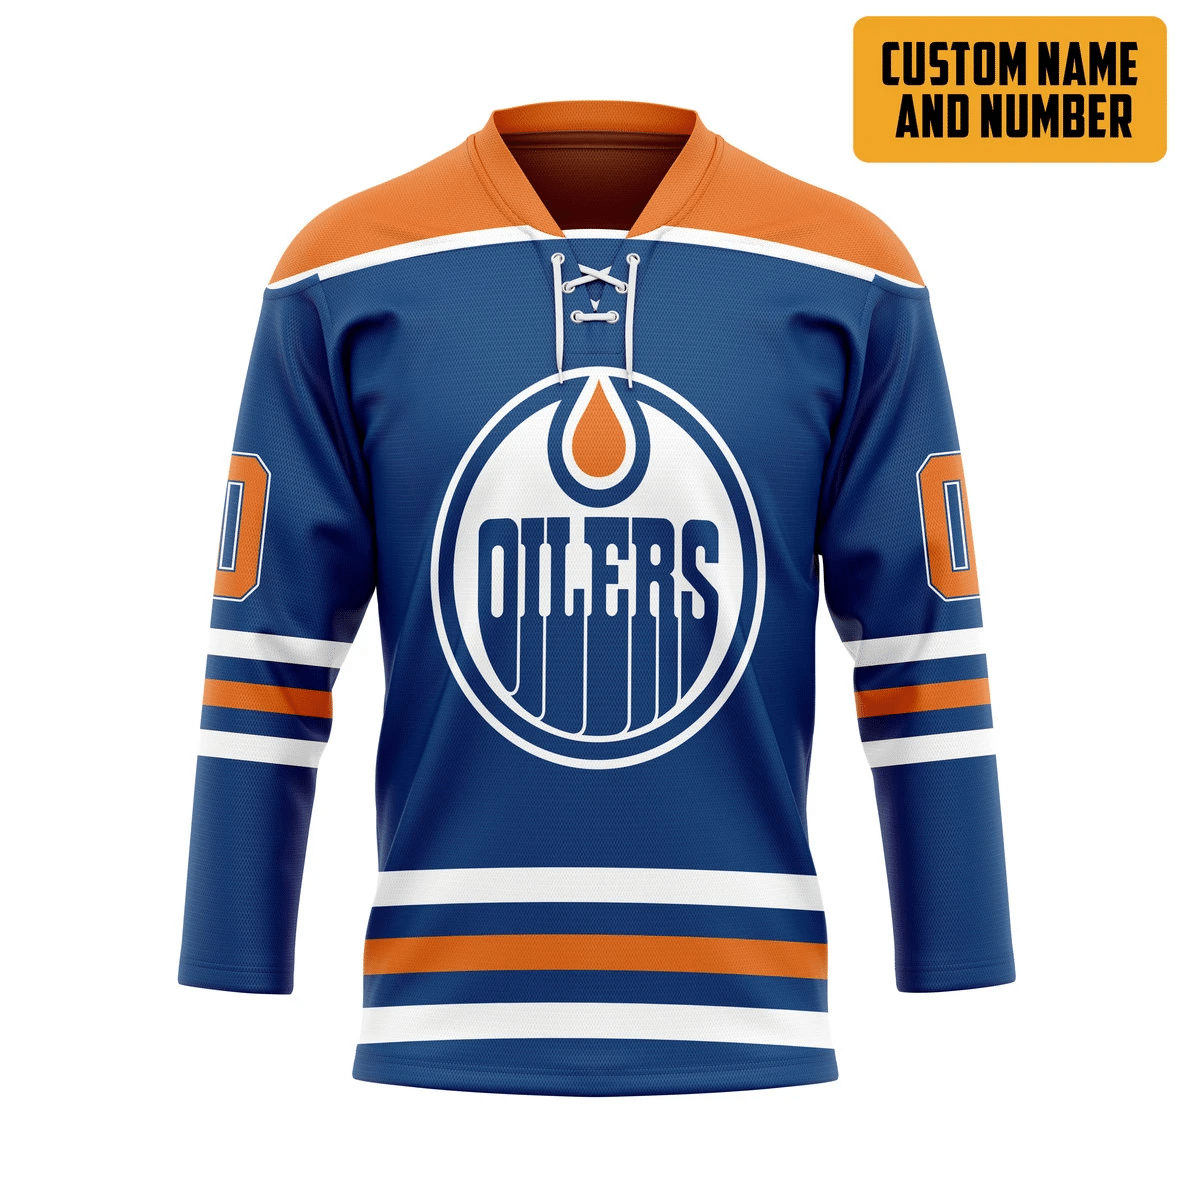 The hockey jersey is a must for every player in a team. 18